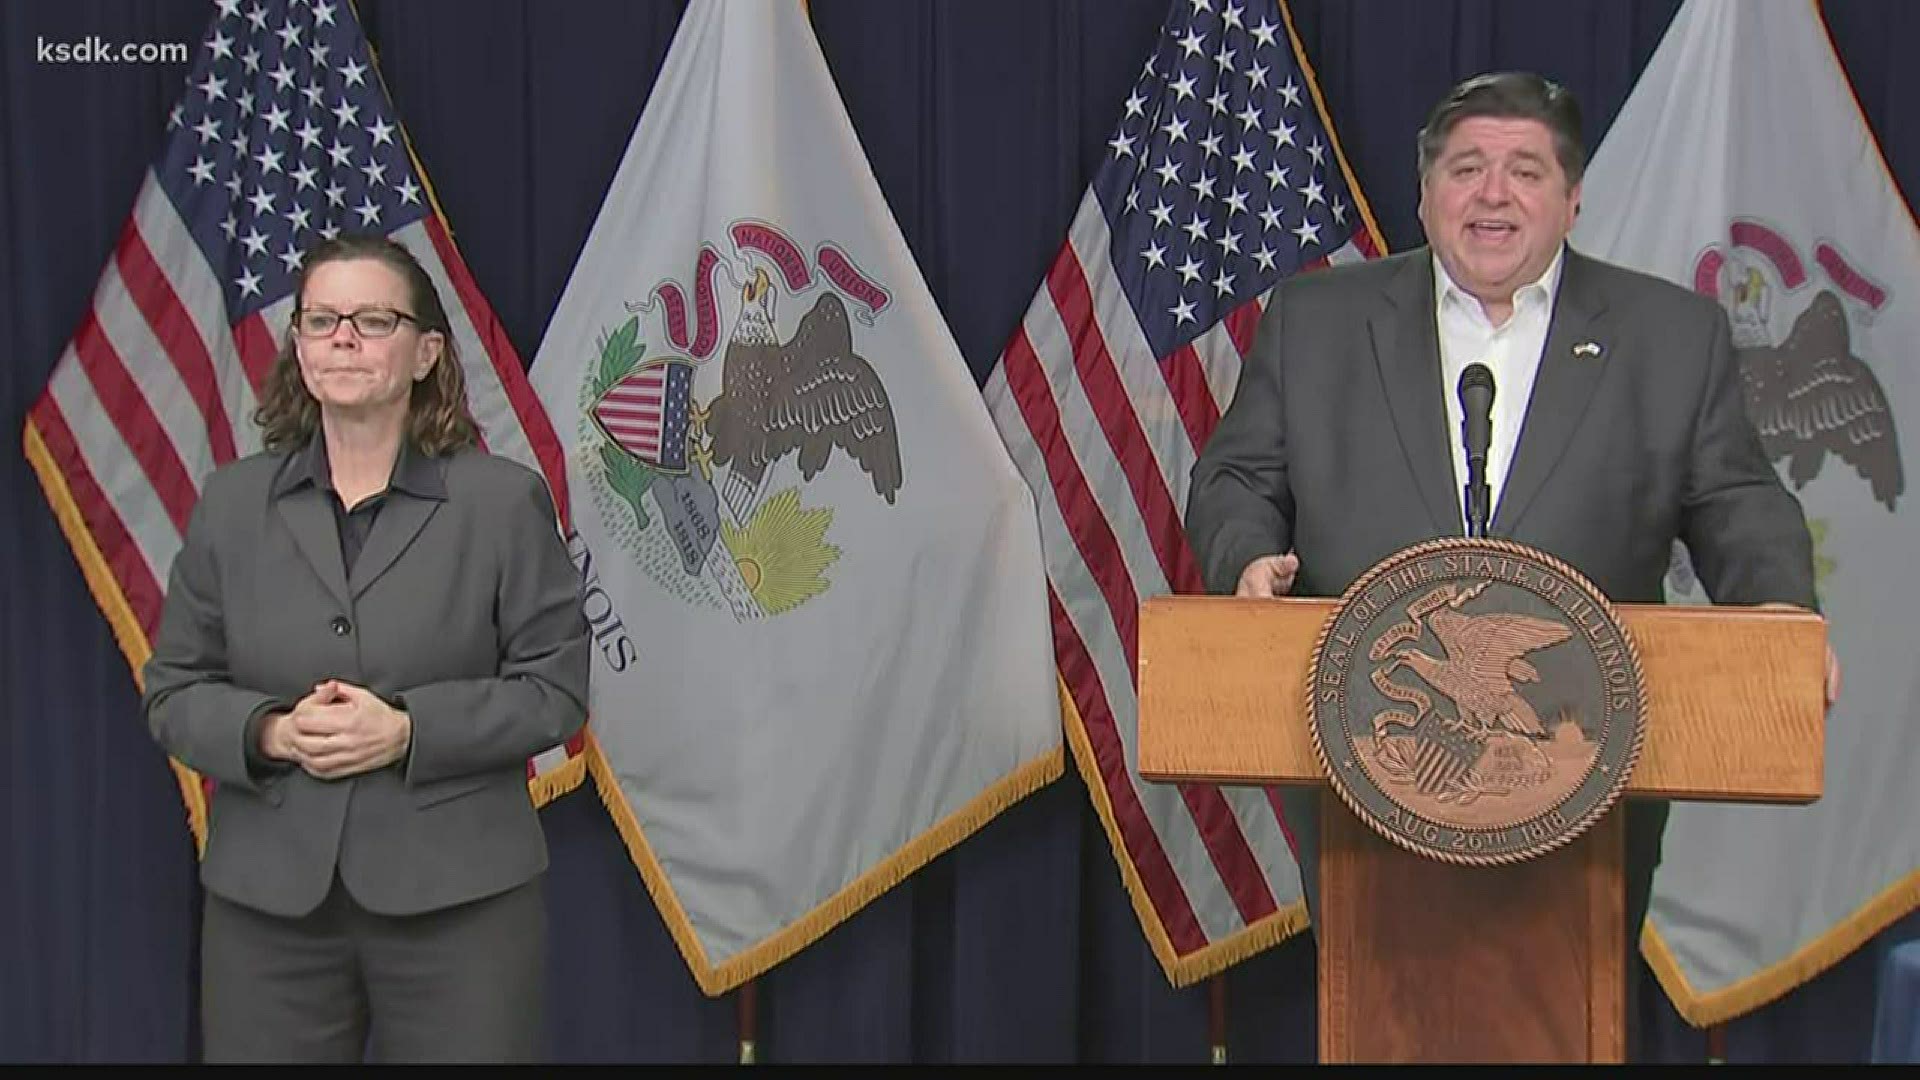 Pritzker said Sunday's numbers could be a sign that the cure could be bending in Illinois.